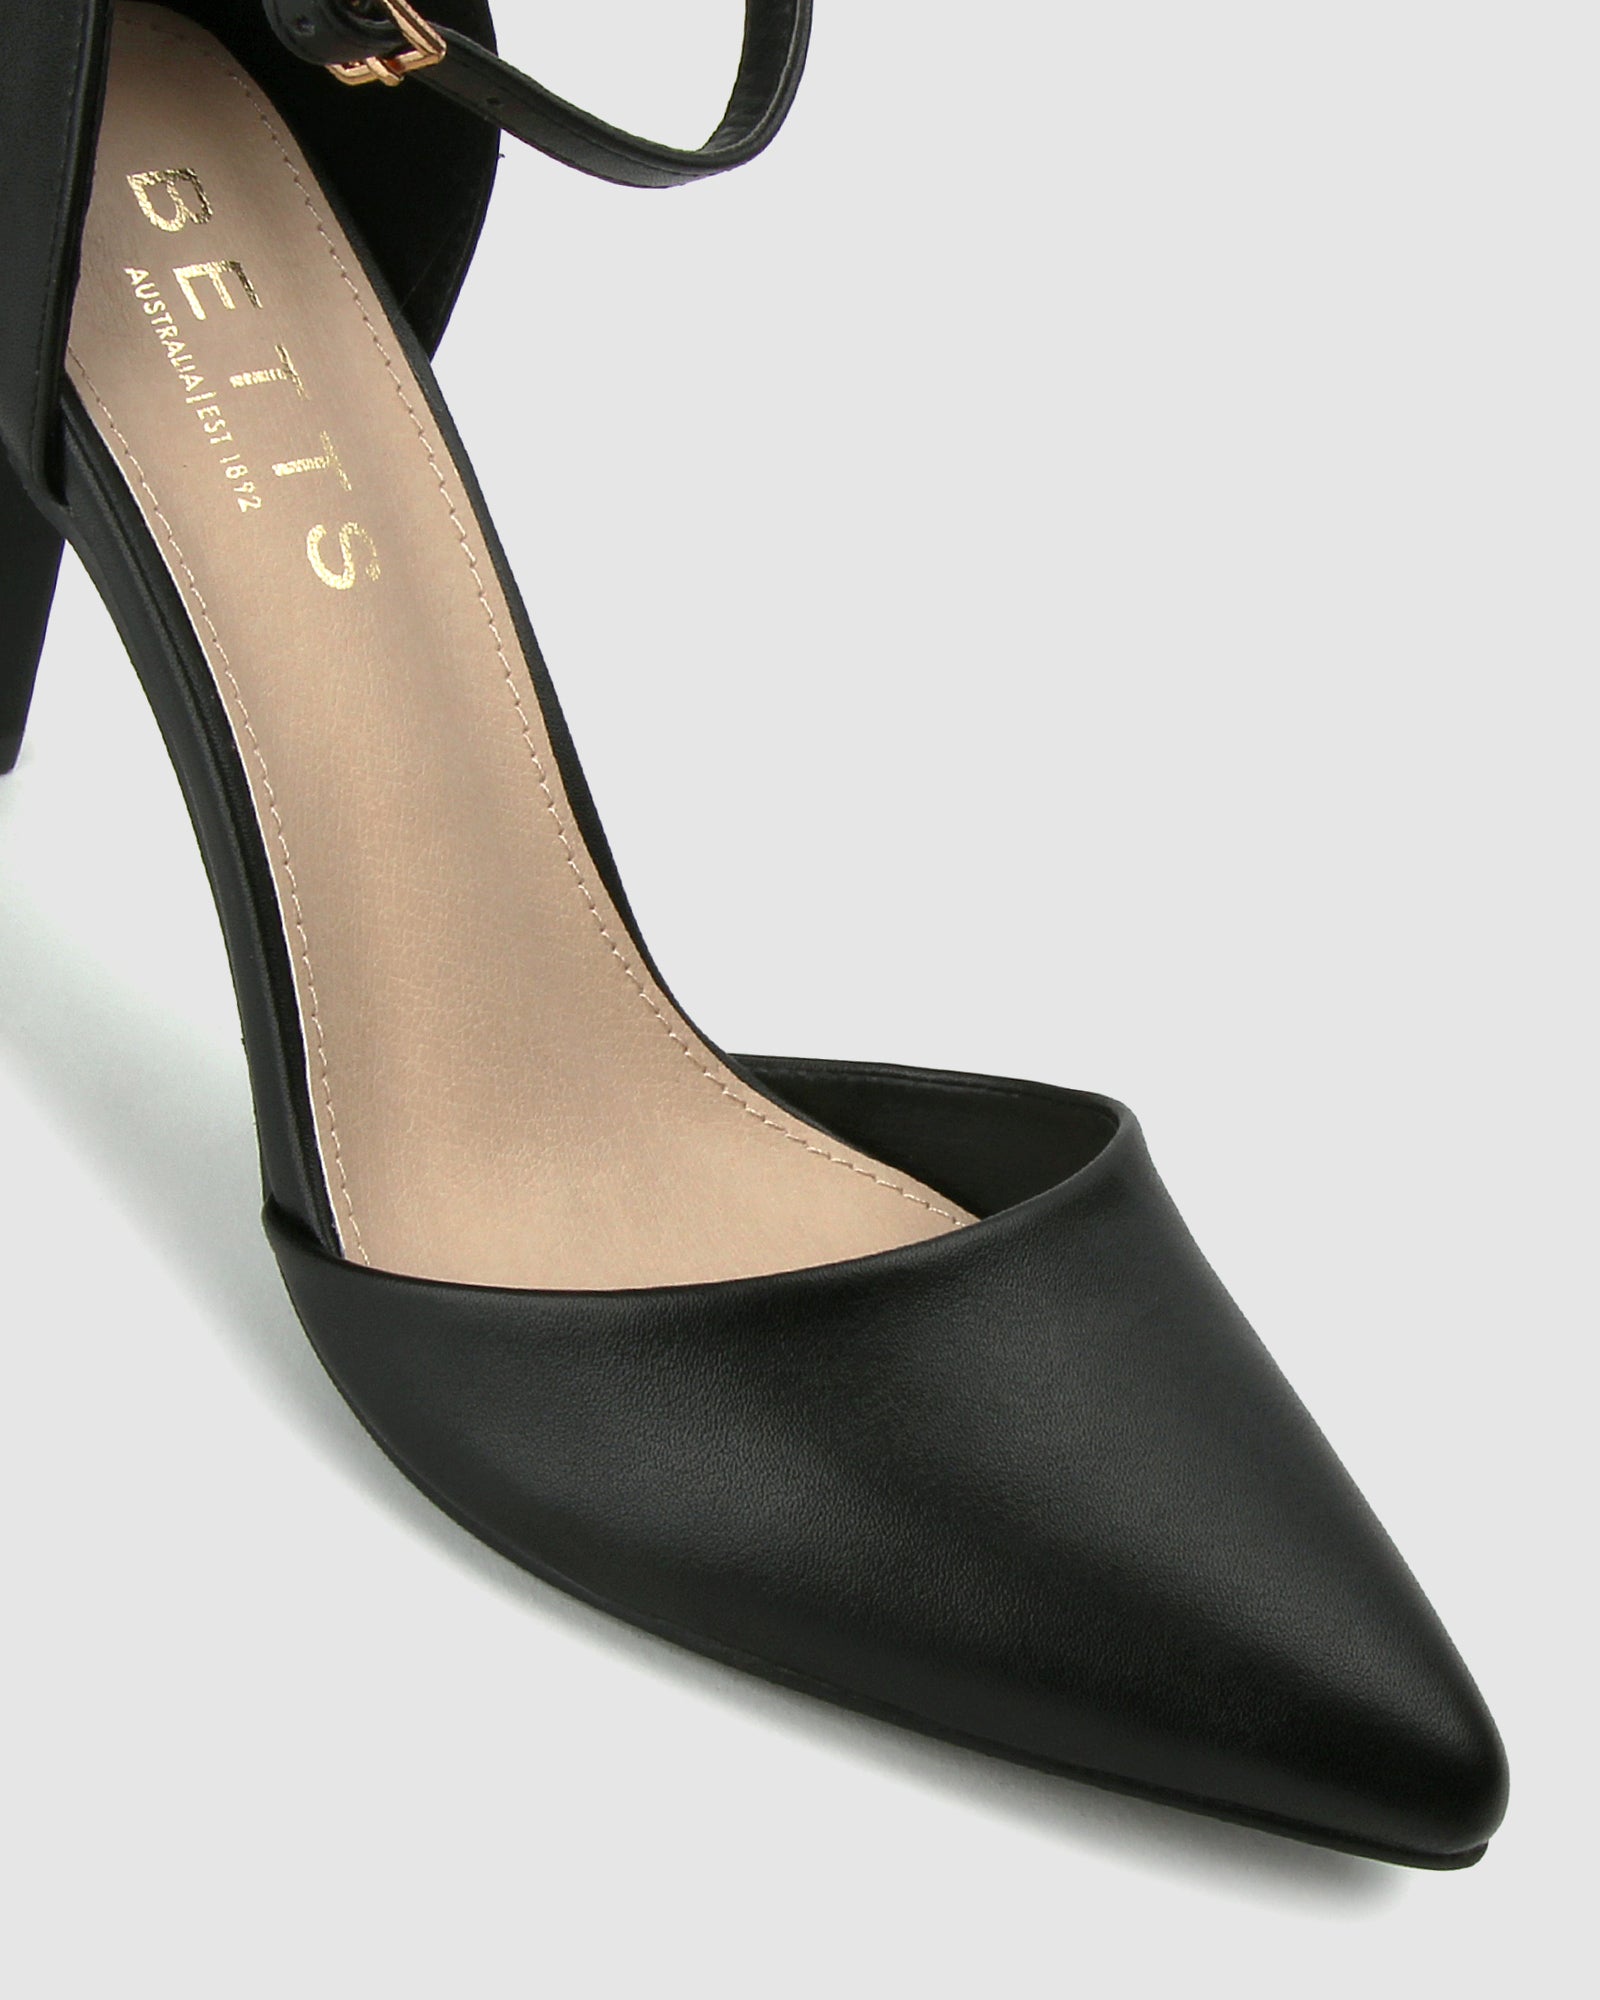 Silk Satin Pointed Toe pumps | Buy black high heel court shoes